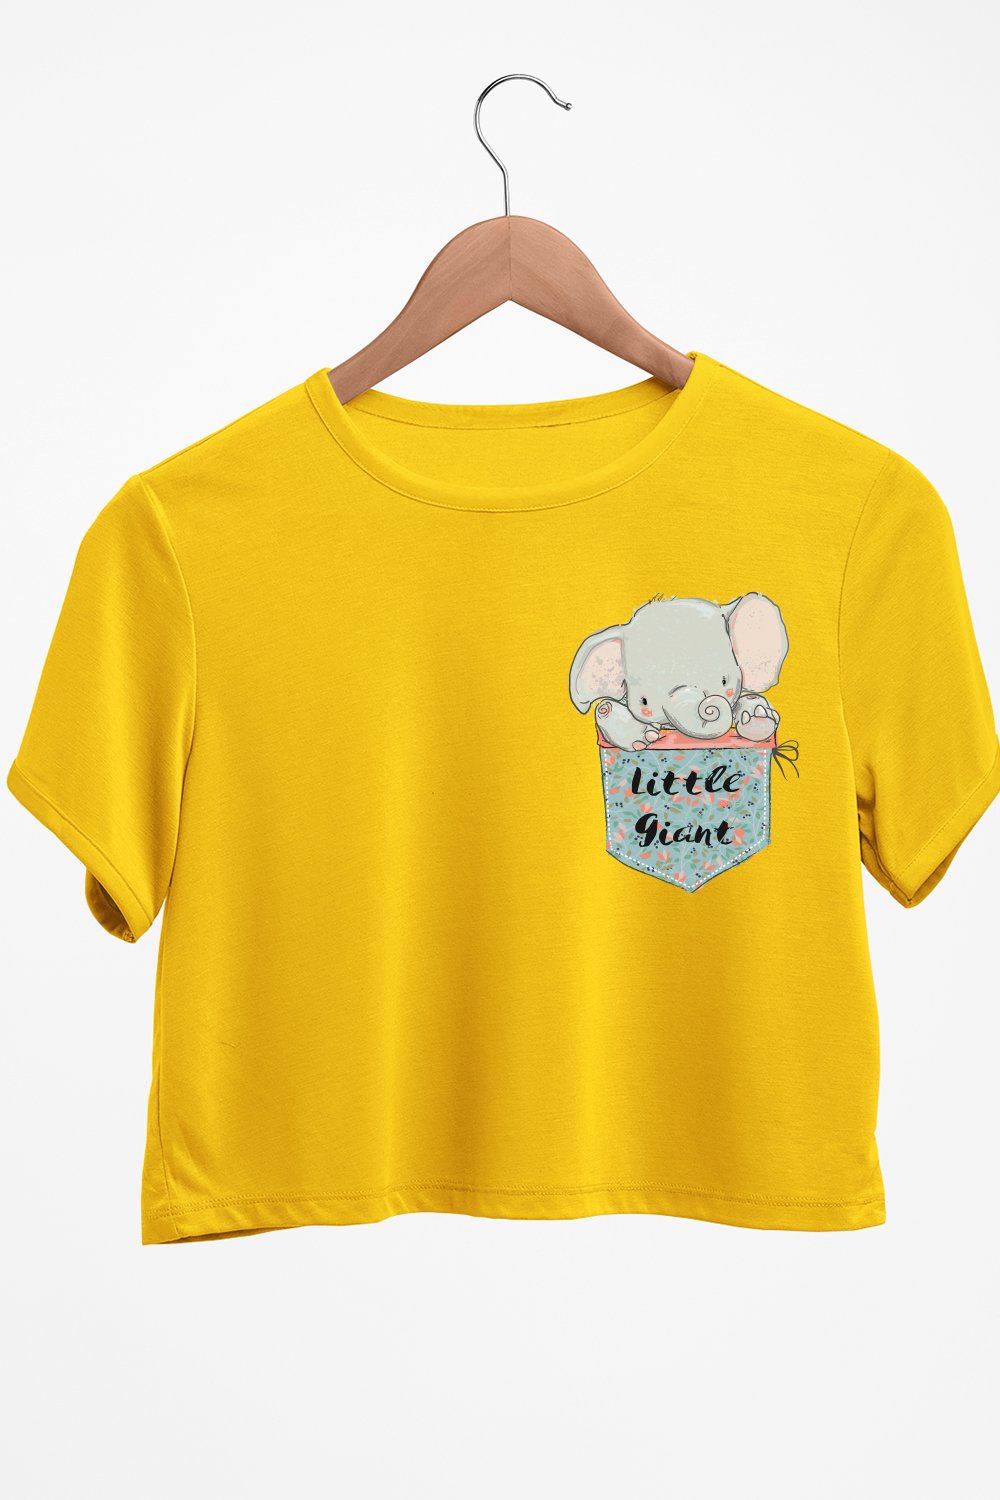 Little Giant Graphic Printed Yellow Crop Top